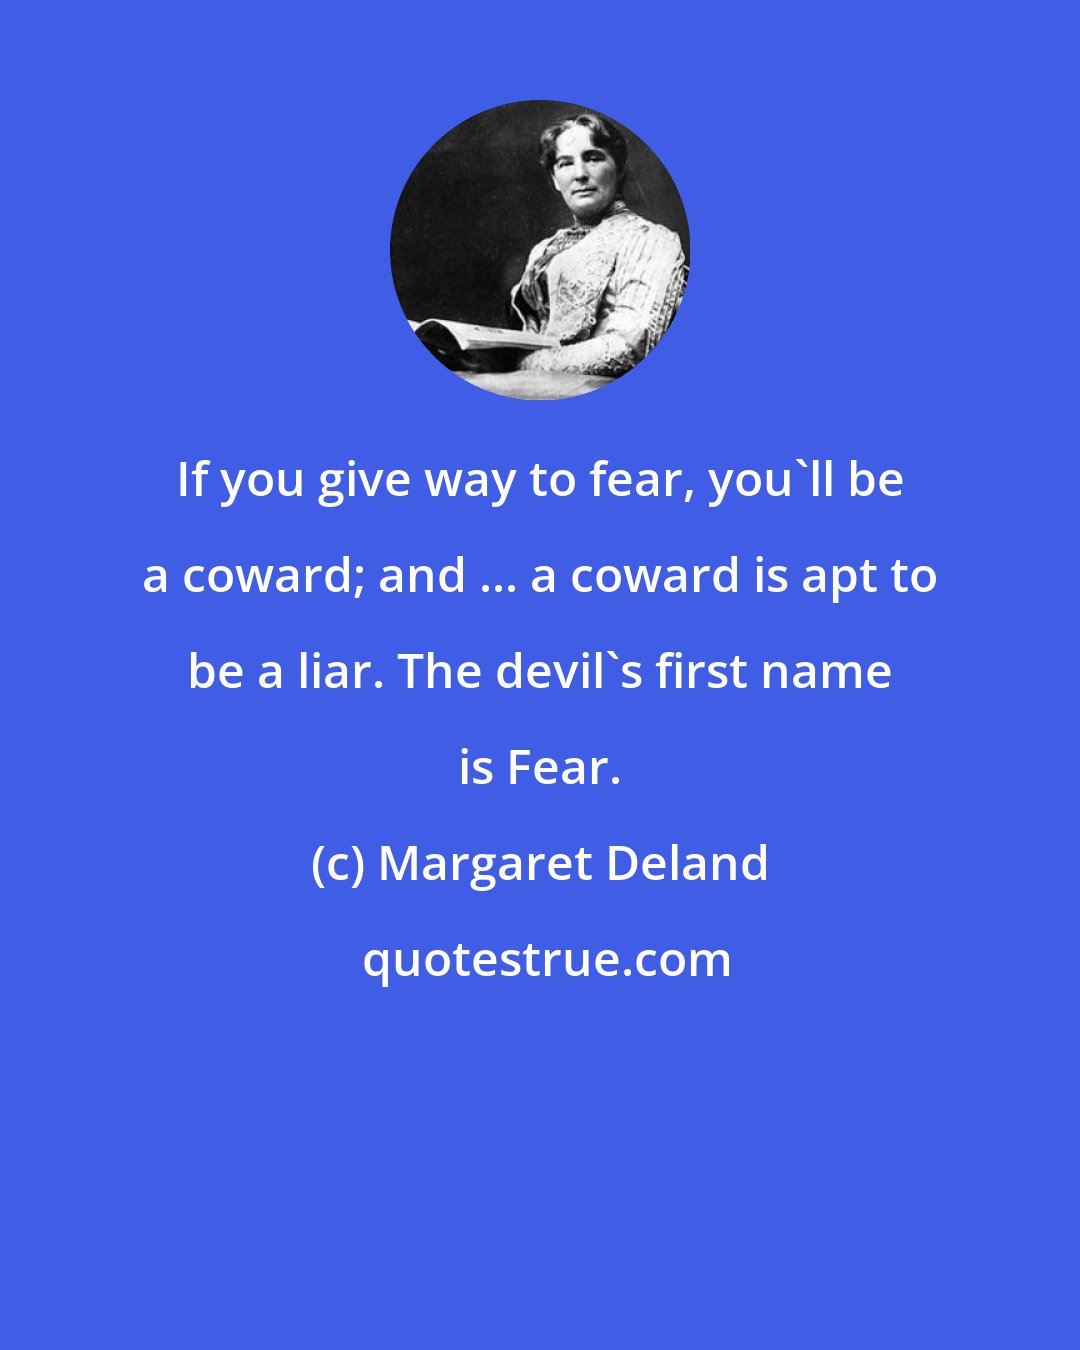 Margaret Deland: If you give way to fear, you'll be a coward; and ... a coward is apt to be a liar. The devil's first name is Fear.